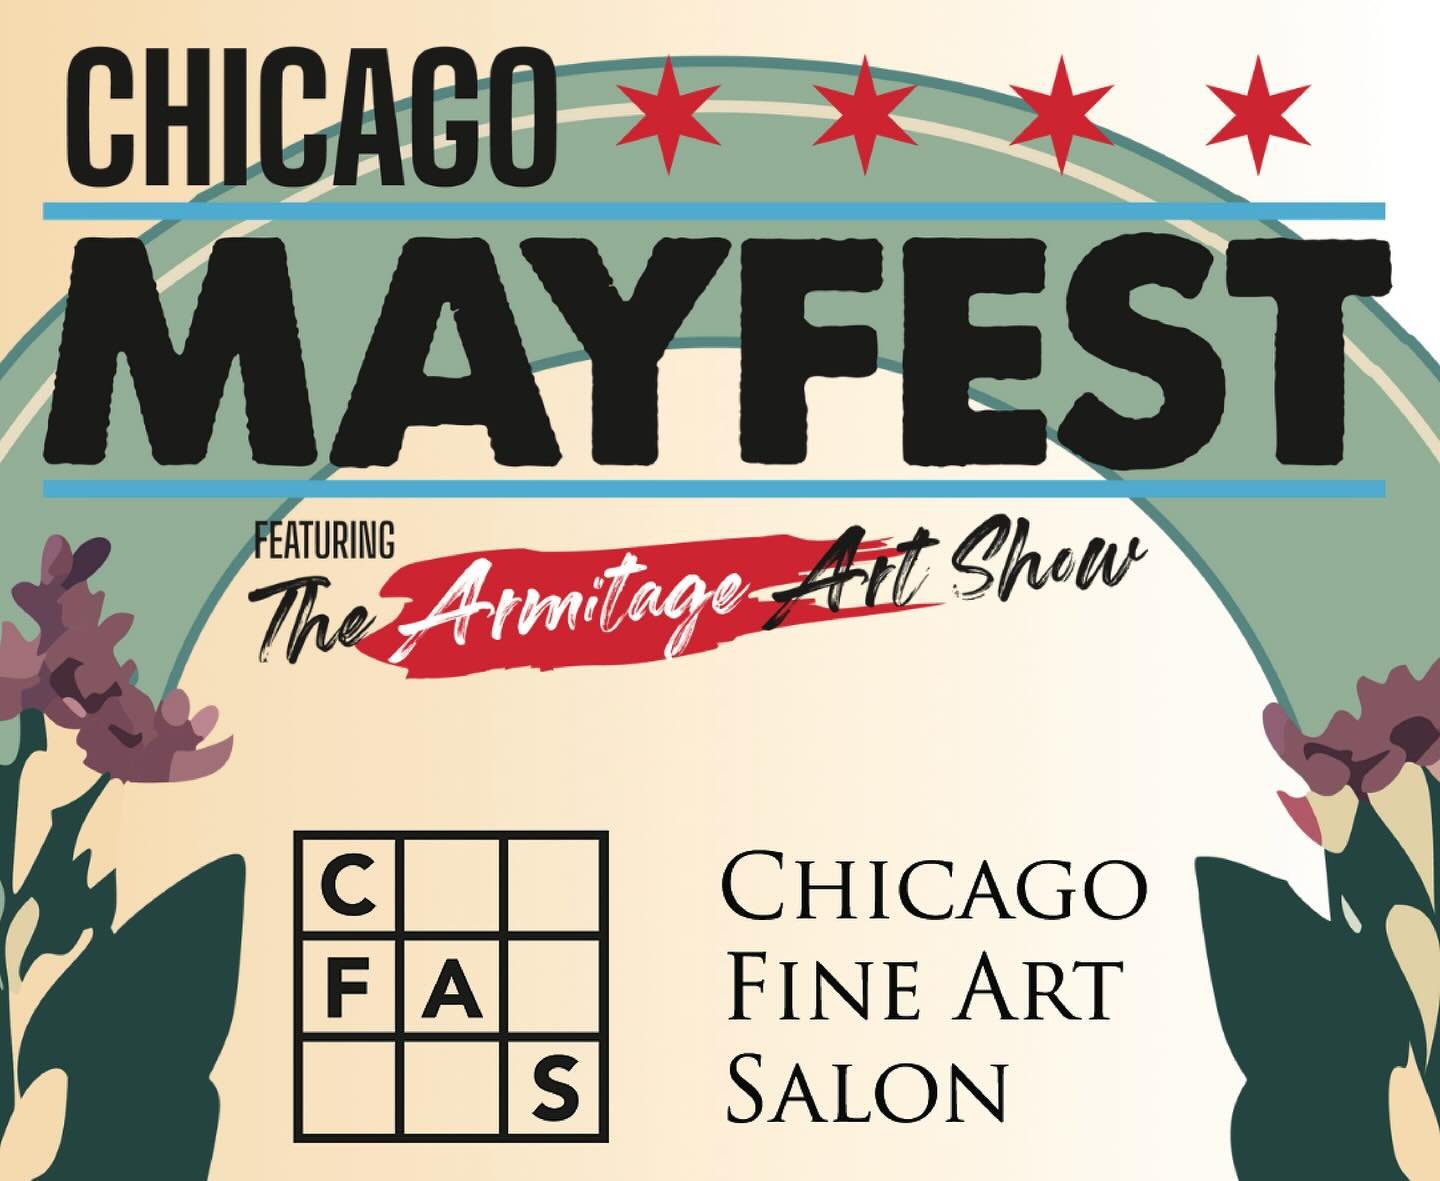 Chicago Fine Art Salon will have a booth in Mayfest THIS weekend! 

We&rsquo;ll be showcasing some of our represented artists&rsquo; original works as well as prints, and we hope to see you there! The festival will be hosted from Sheffield Ave to Rac